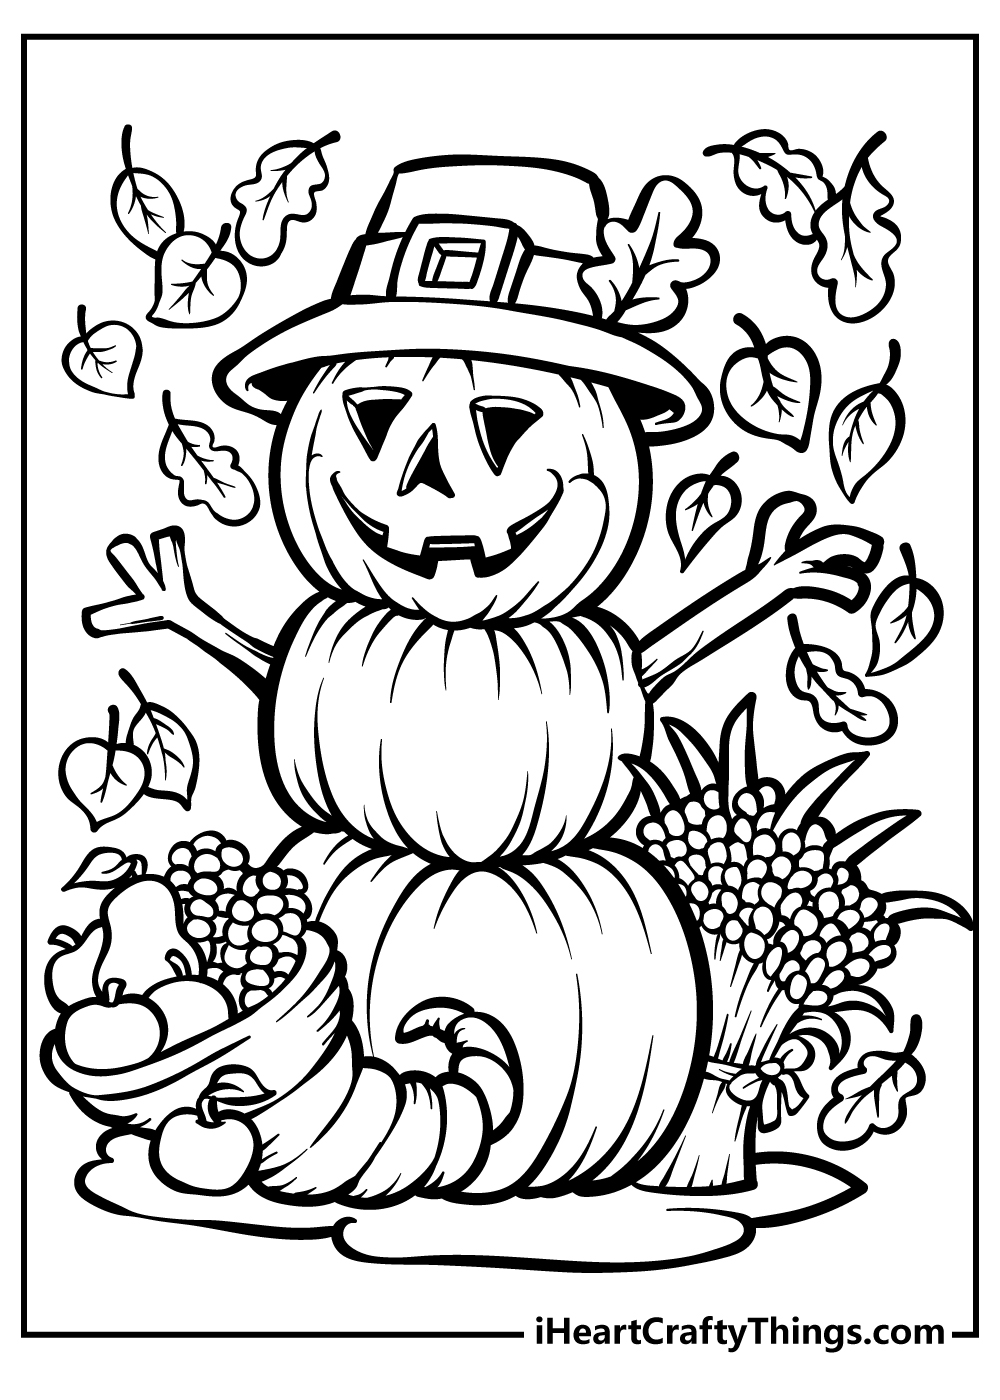 Halloween Coloring Sheet for children free download